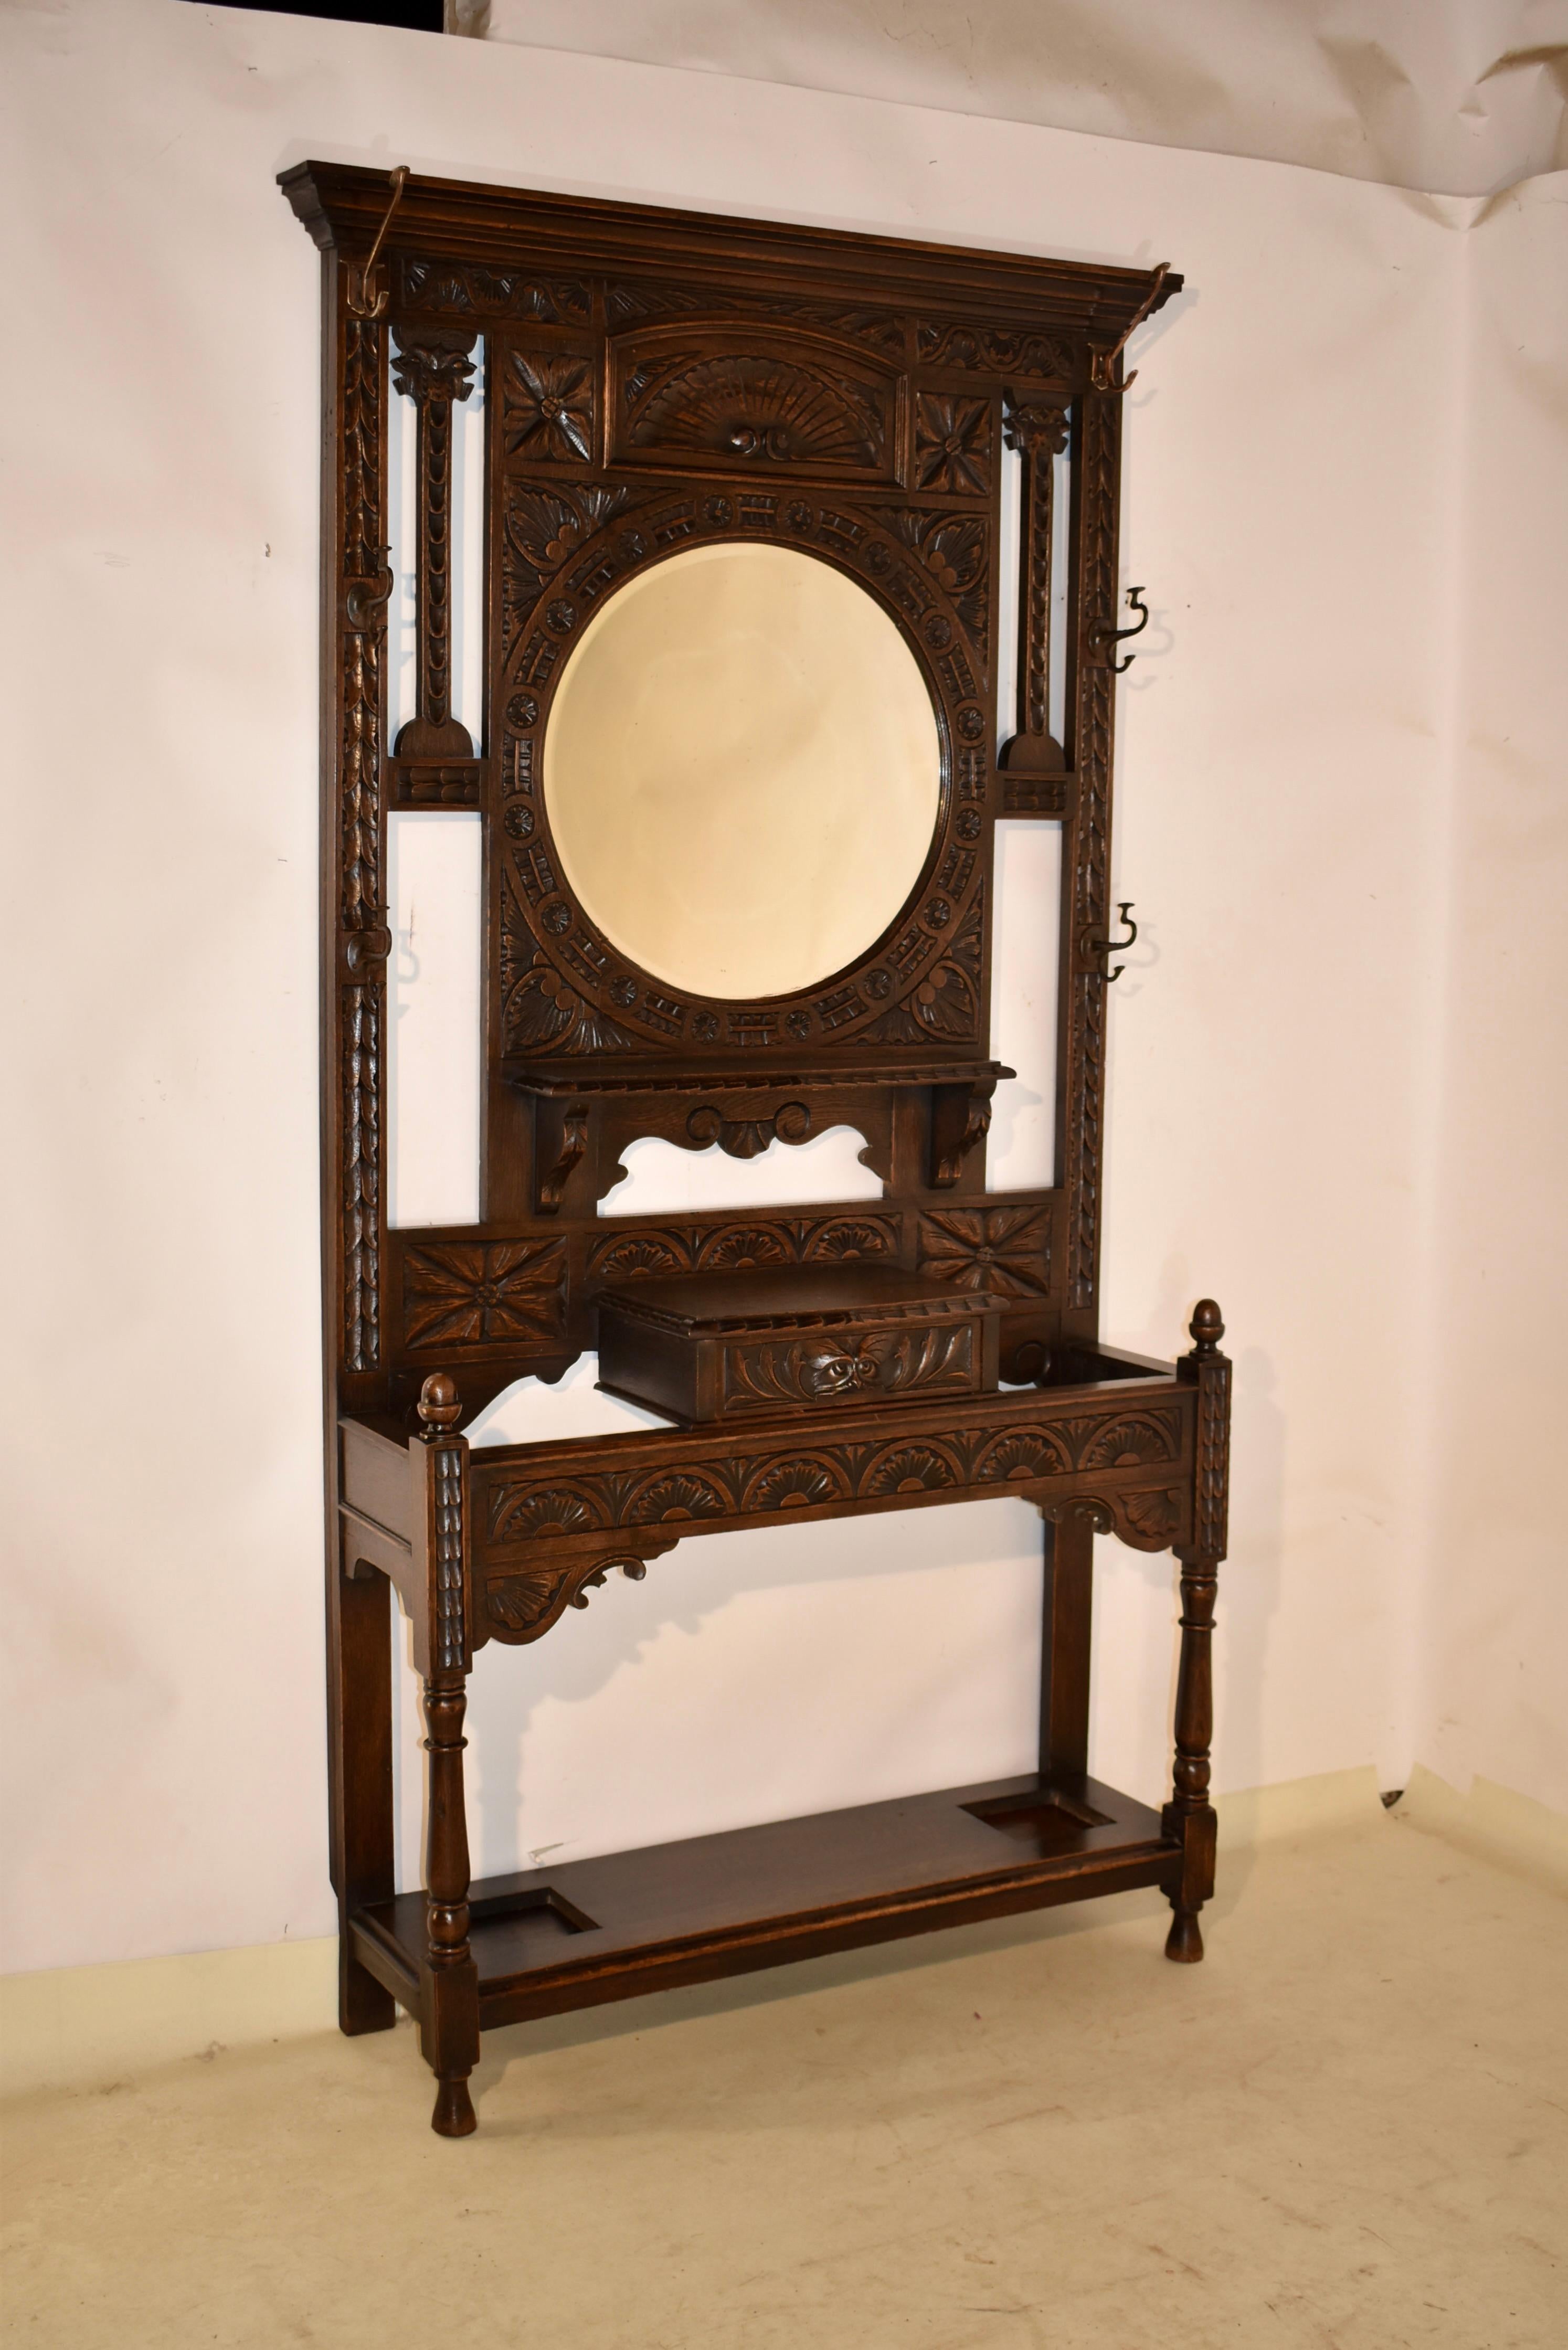 19th century oak hall stand from England.  The top has a lovely crown molding, over a hand carved central panel, flanked by carved sides, which have three brass hooks on each side for excellent hat or coat storage.  The central panel is wonderfully